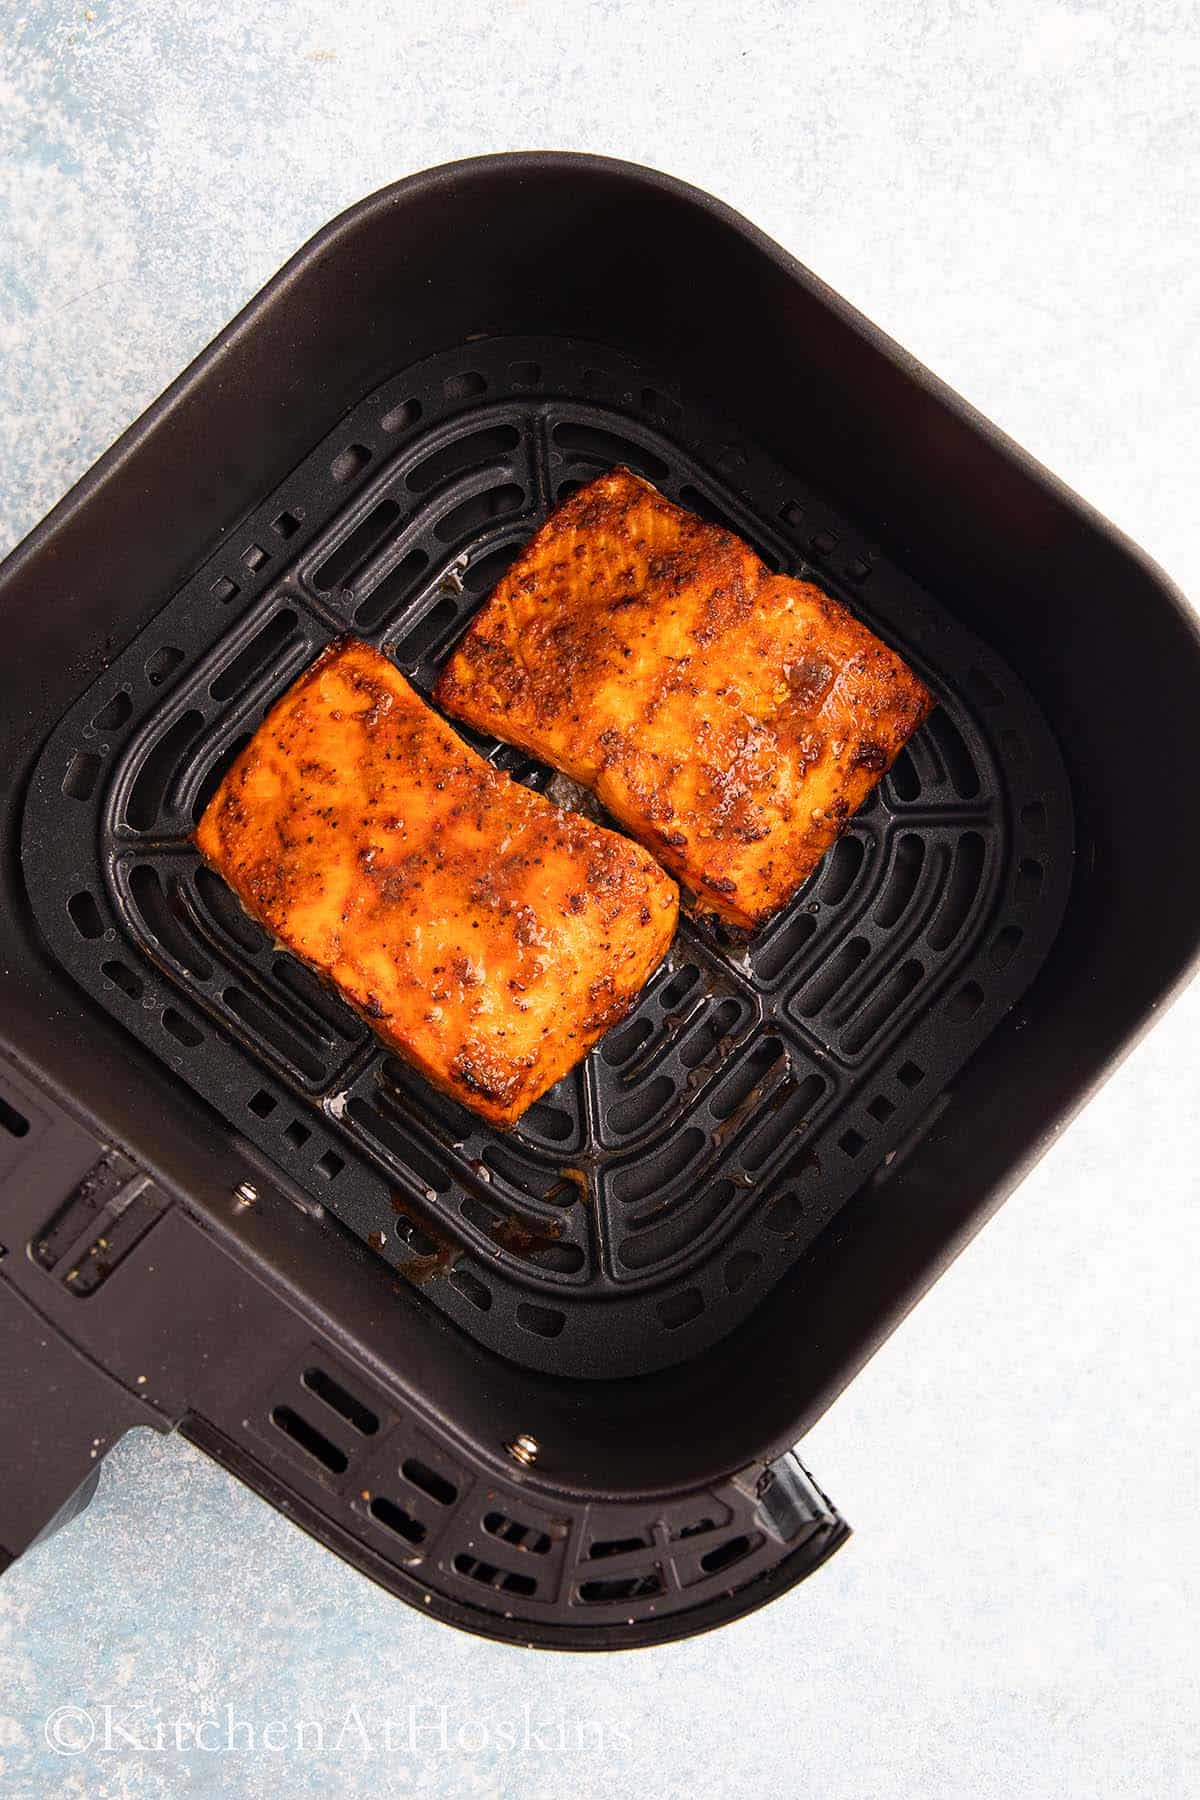 cooked spicy salmon fillets in an air fryer basket.